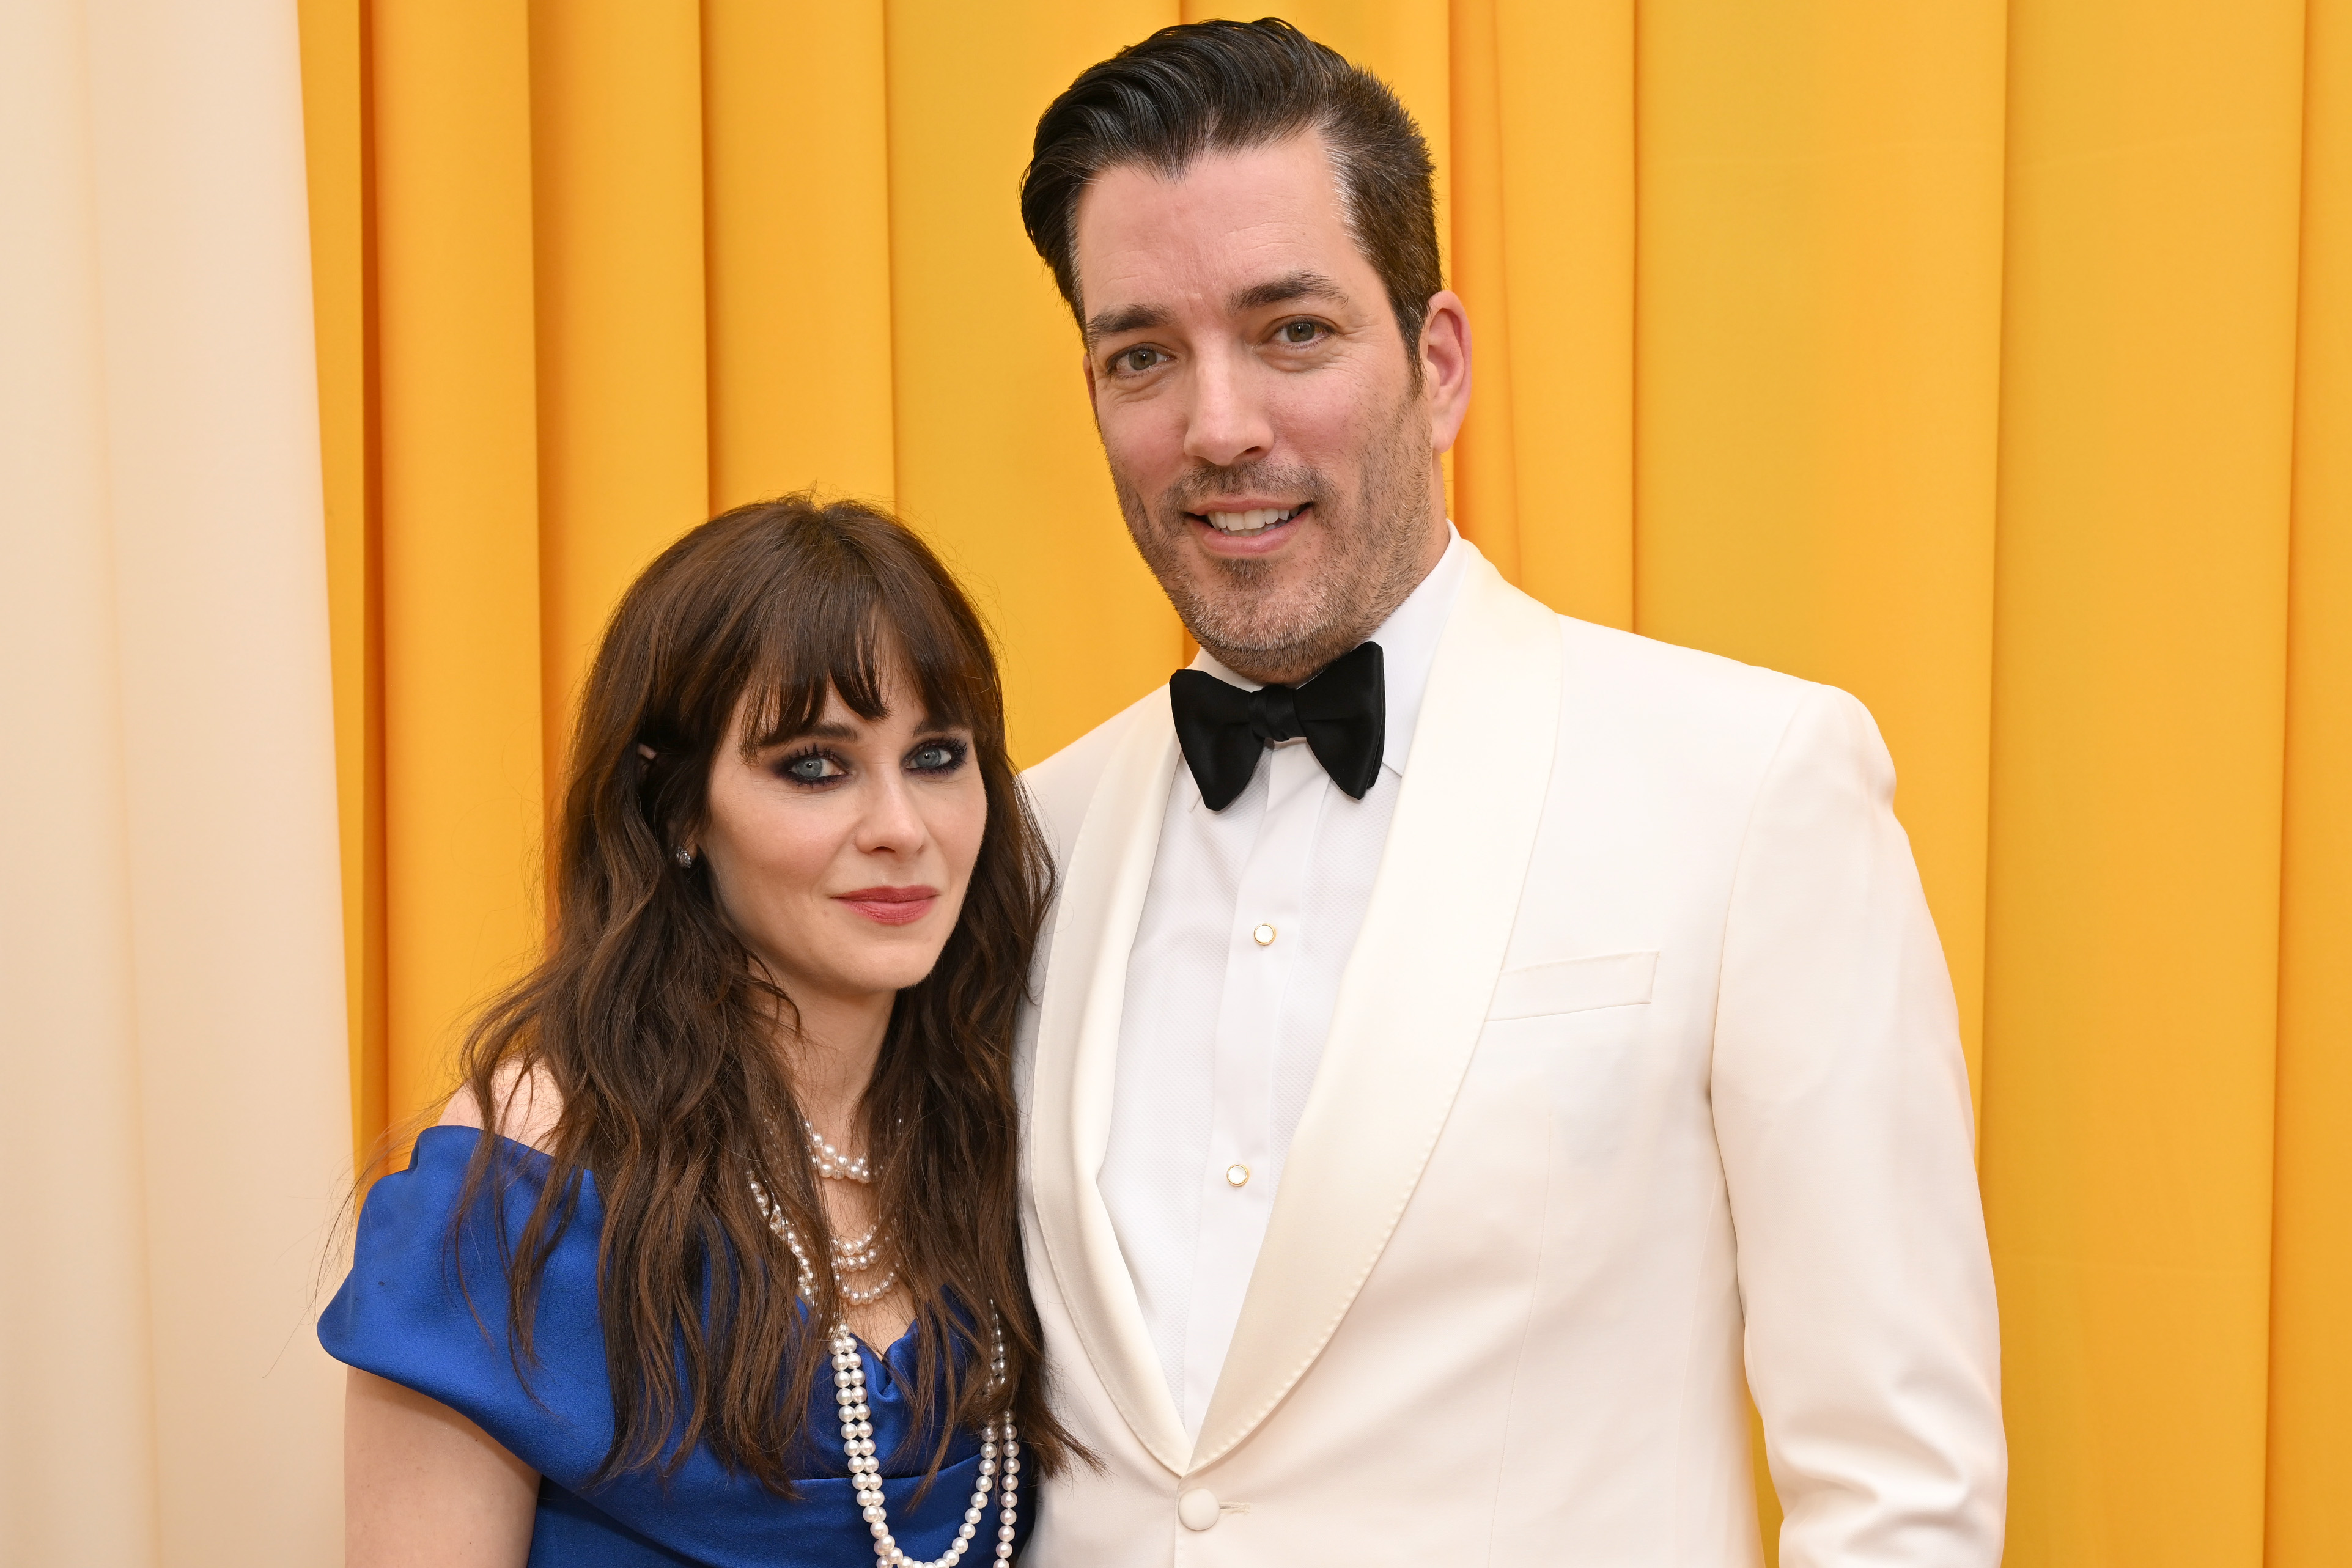 Zooey Deschanel and Jonathan Scott of ‘Property Brothers' are engaged